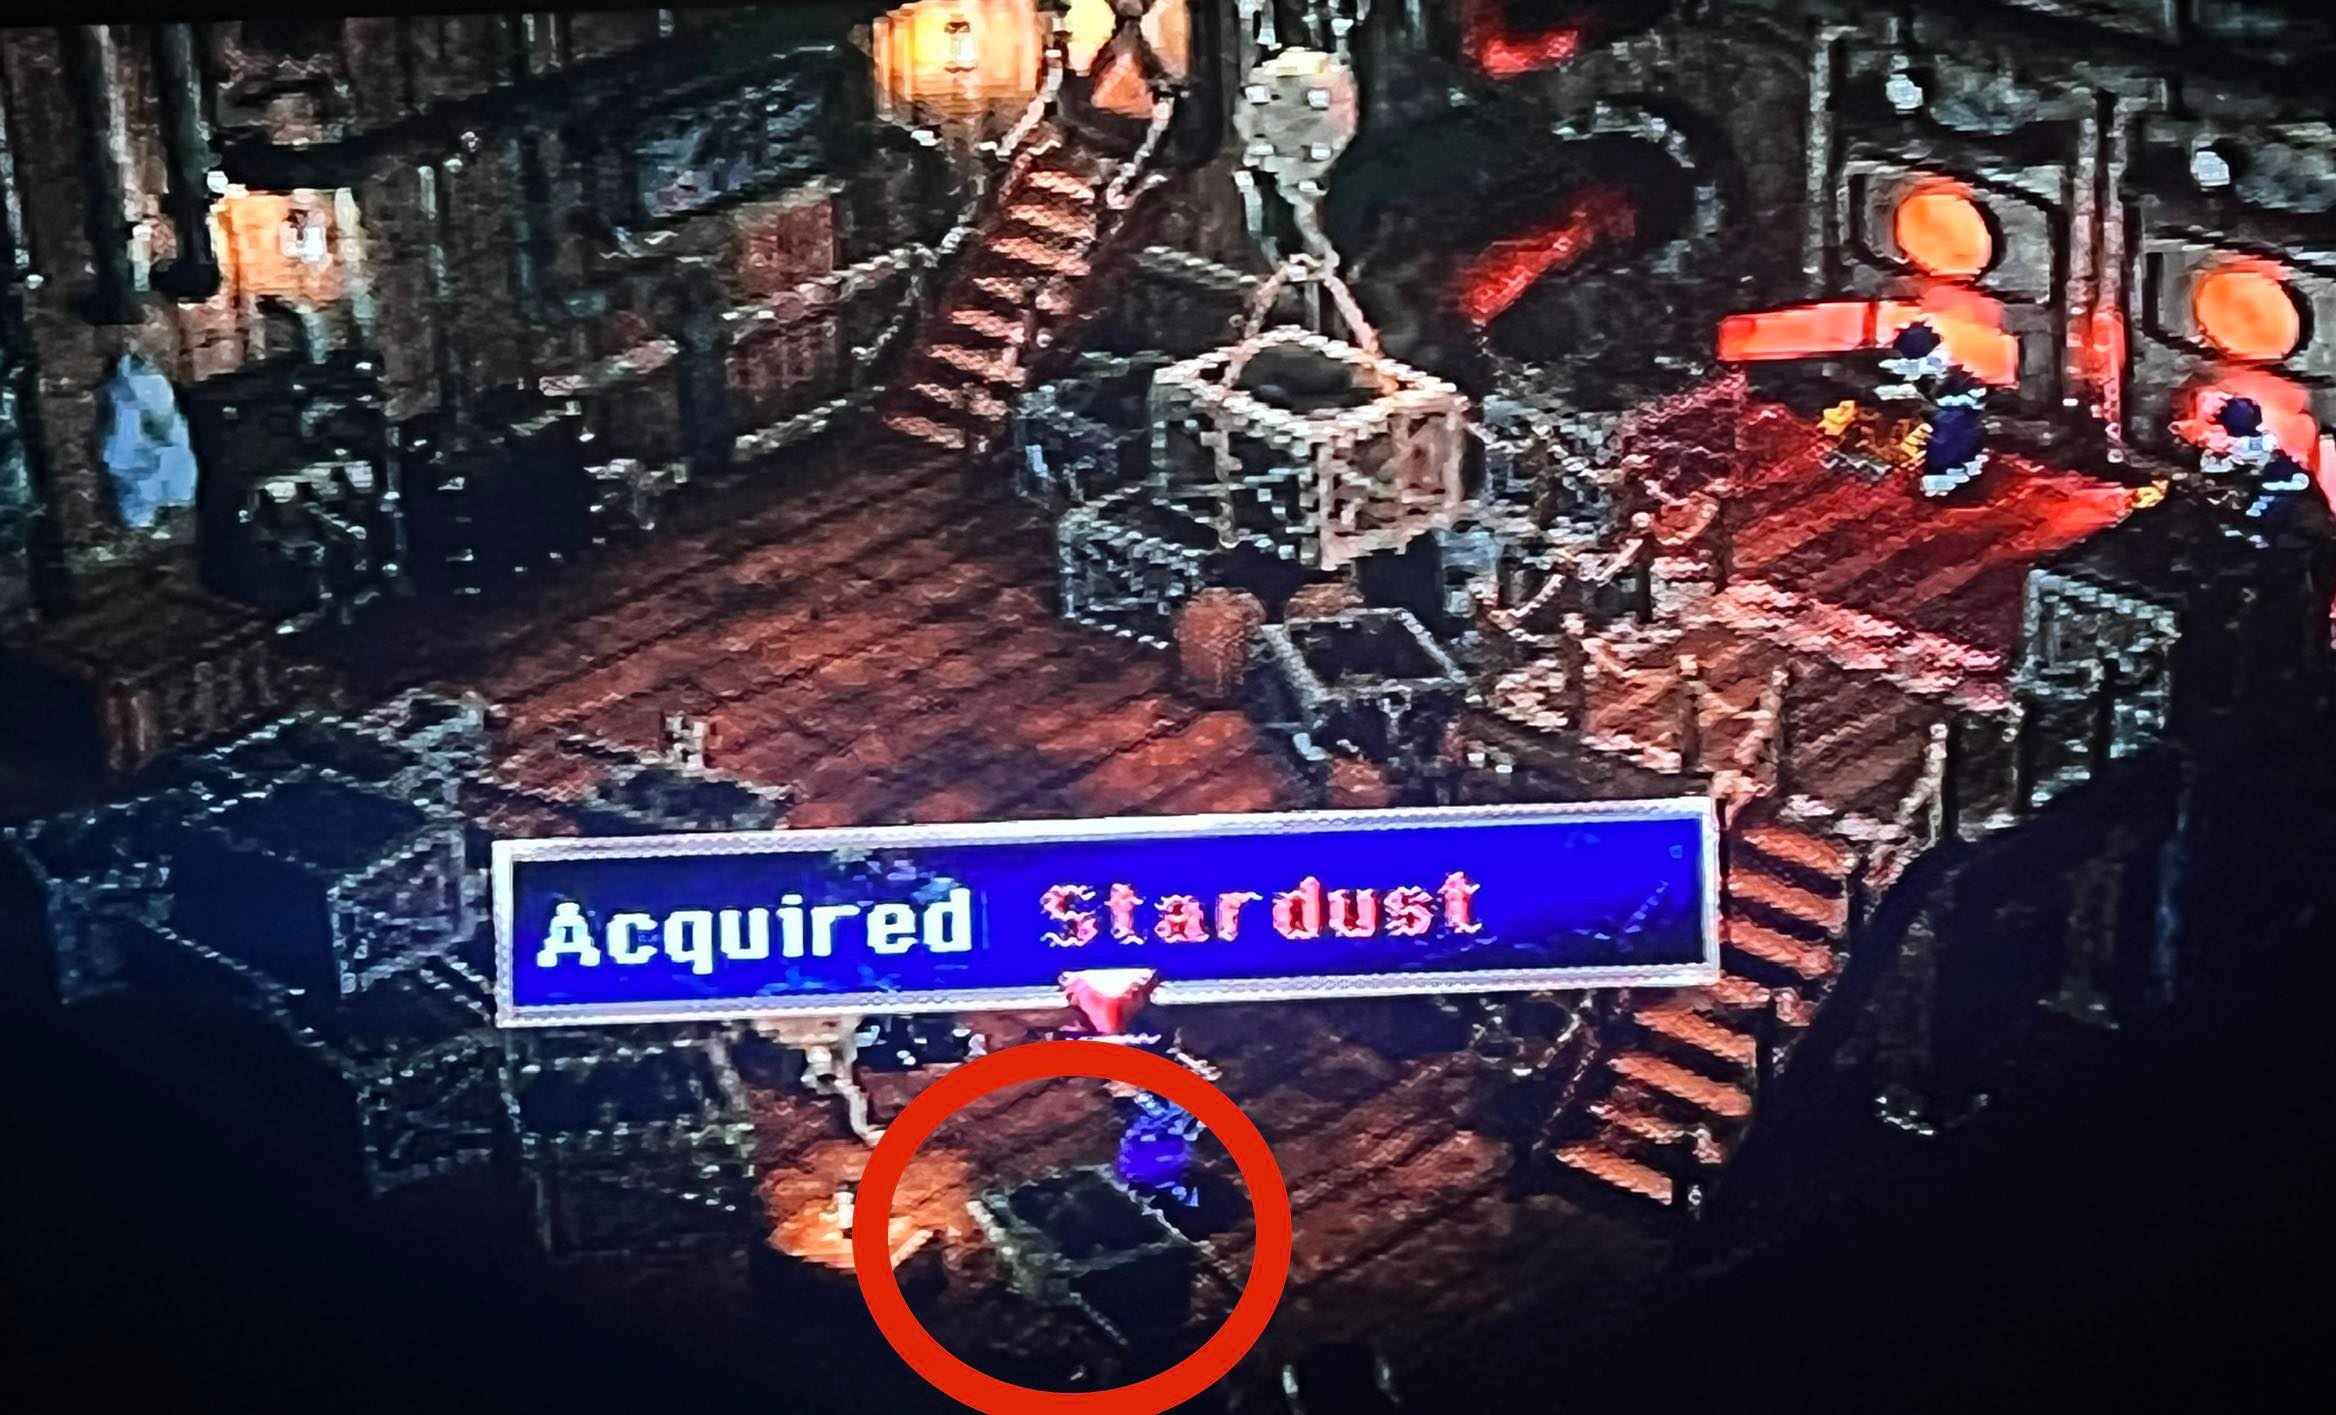 Second Stardust location on Queen Fury.